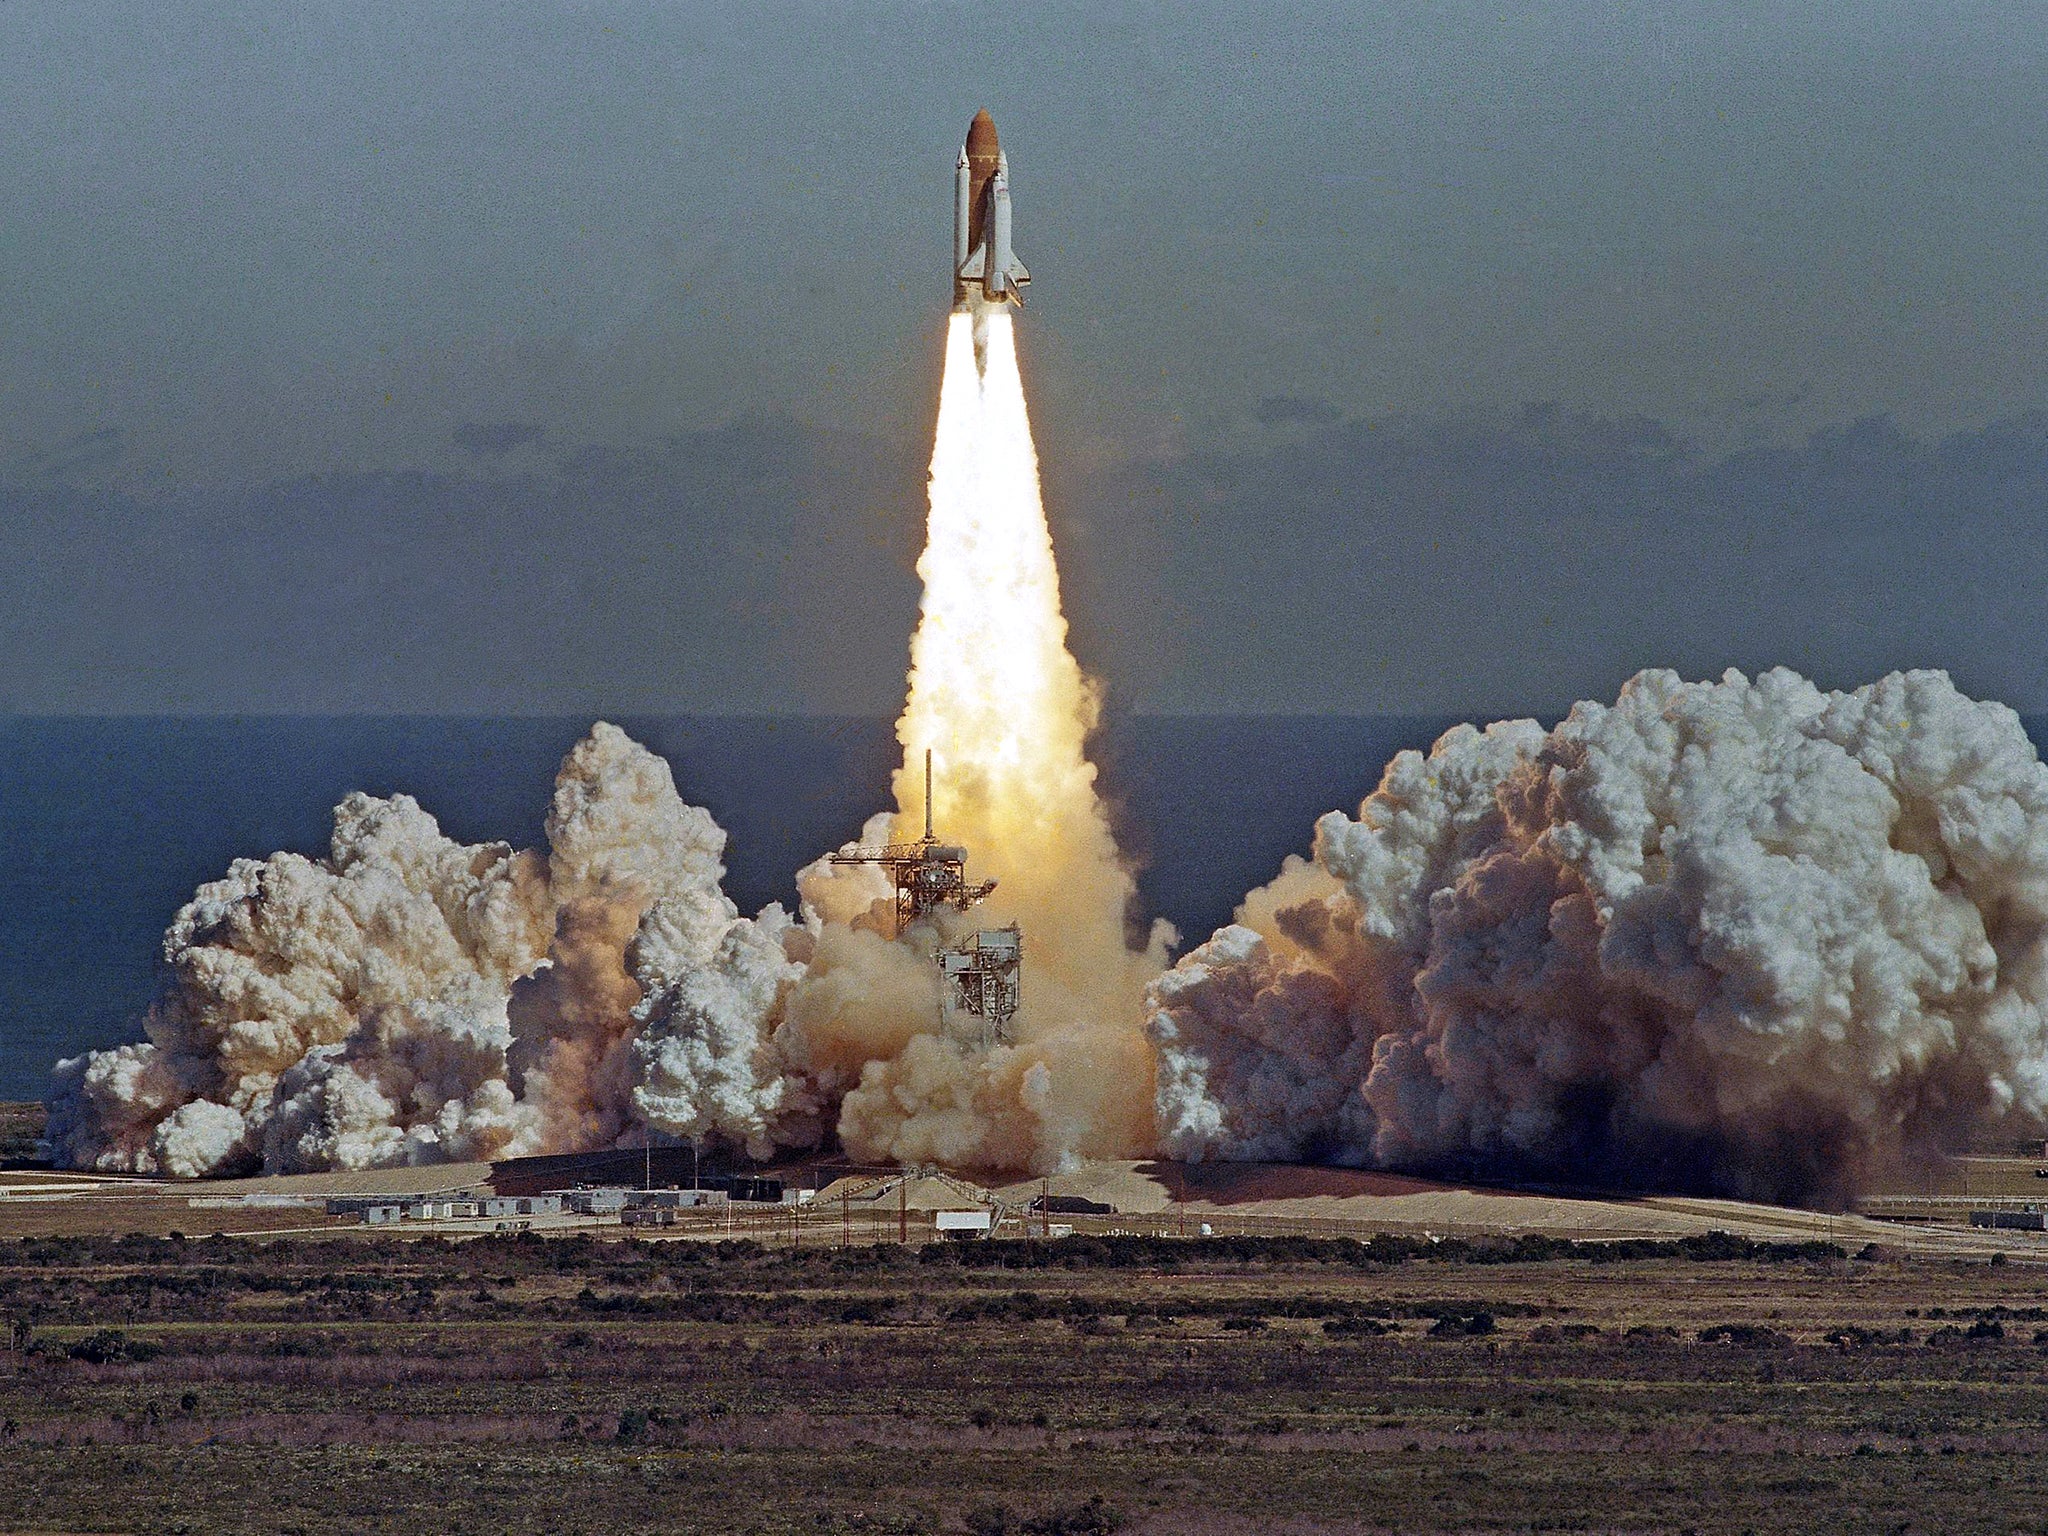 1986: the Challenger spacecraft burst into flames 73 seconds after it launched